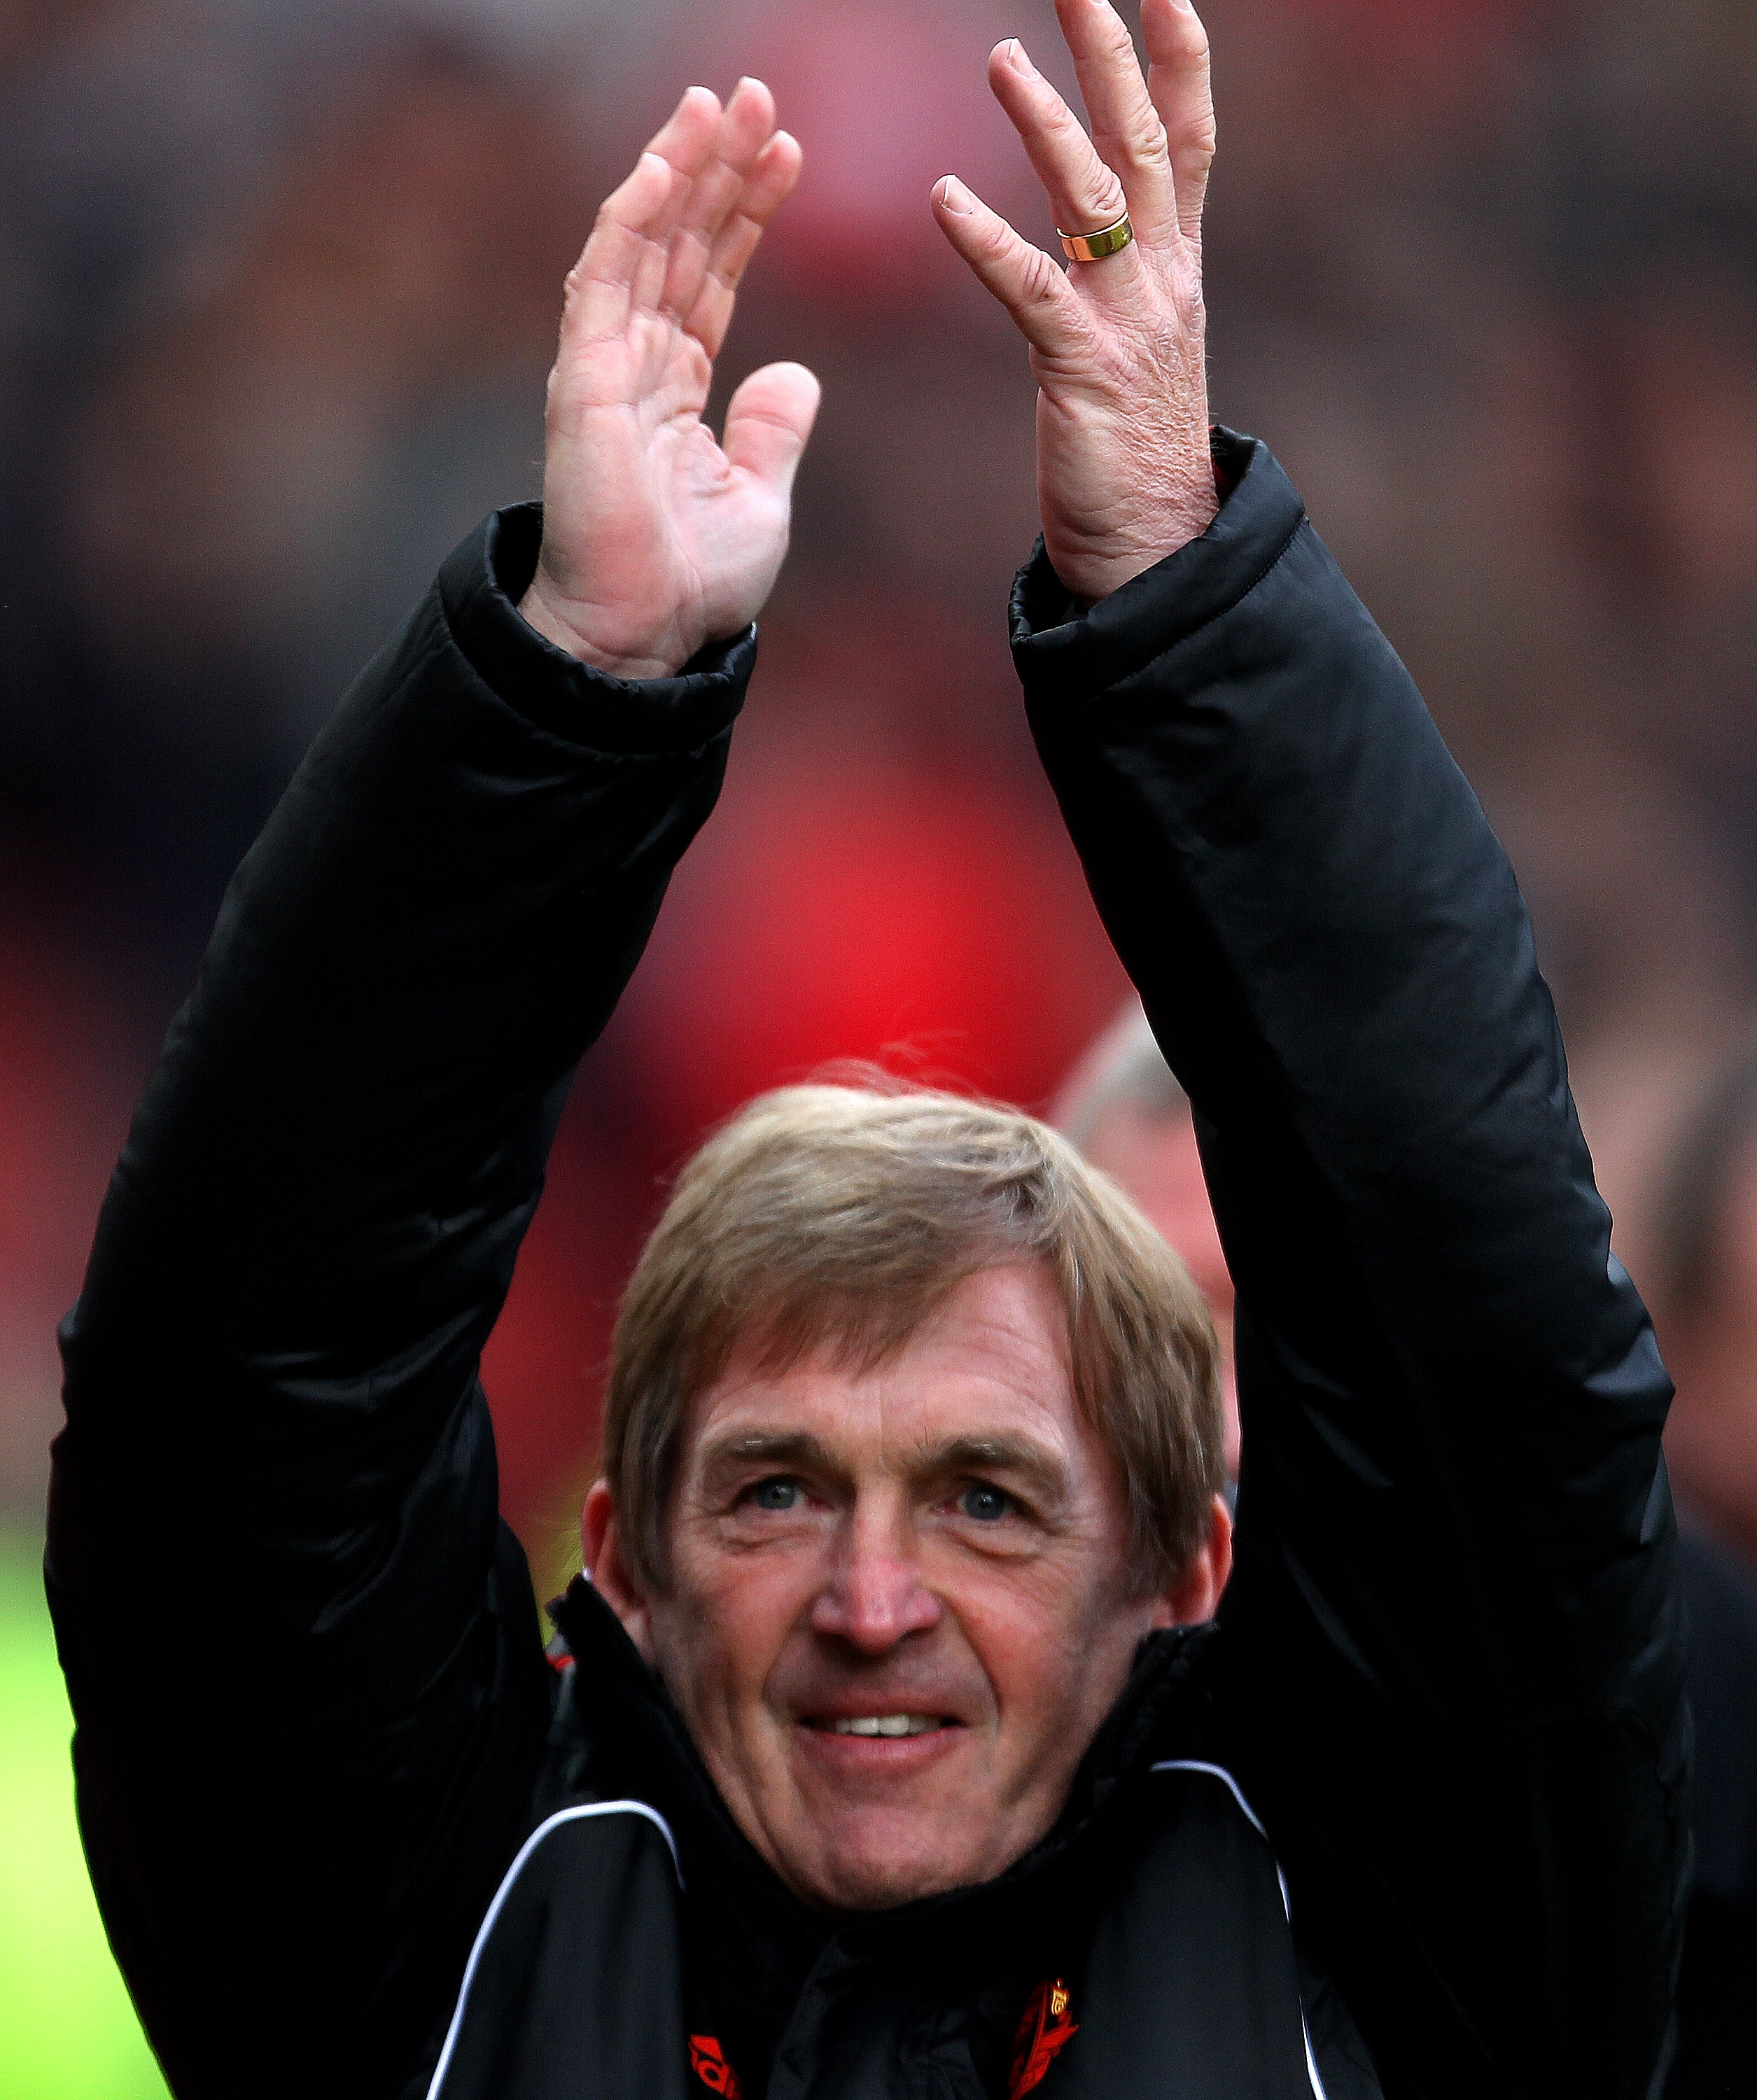 MANCHESTER, ENGLAND - JANUARY 09:  Liverpool Manager Kenny Dalglish salutes the fans prior to the FA Cup sponsored by E.ON 3rd round match between Manchester United and Liverpool at Old Trafford on January 9, 2011 in Manchester, England.  (Photo by Alex L